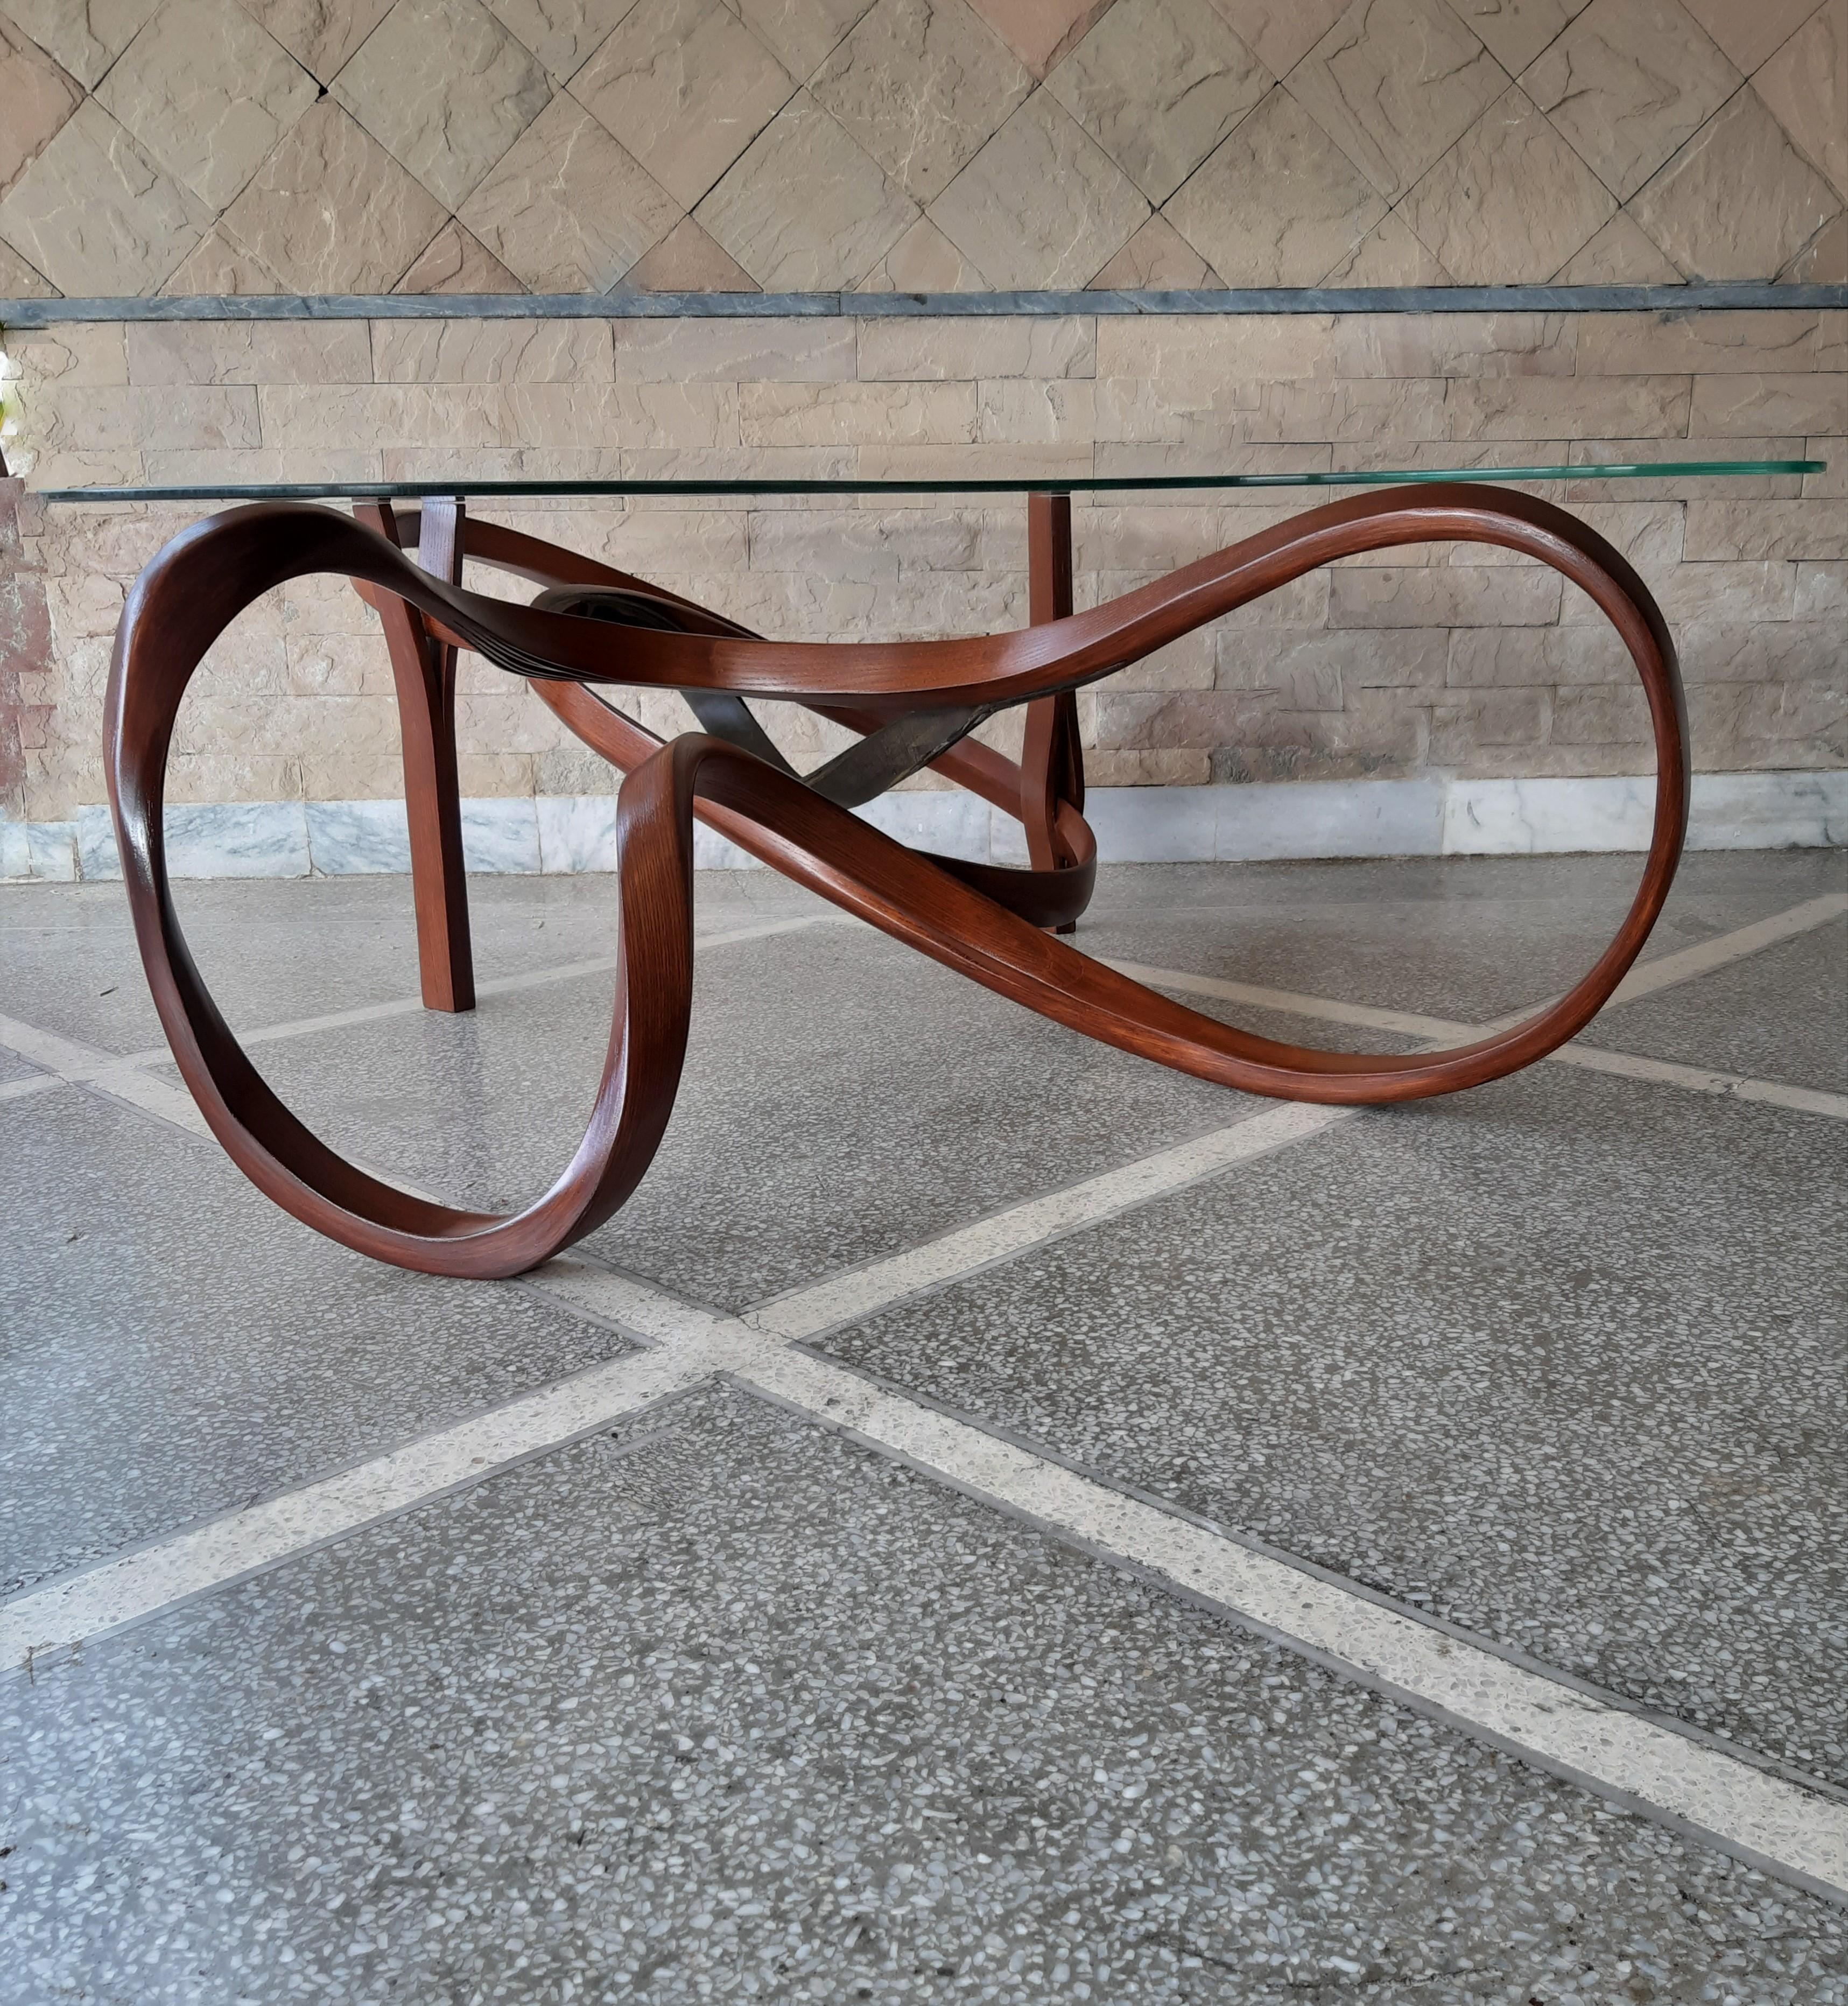 Contemporary Centre Table No. 7 - Vrksa Series by Raka Studio made in Ash Wood and Leather For Sale